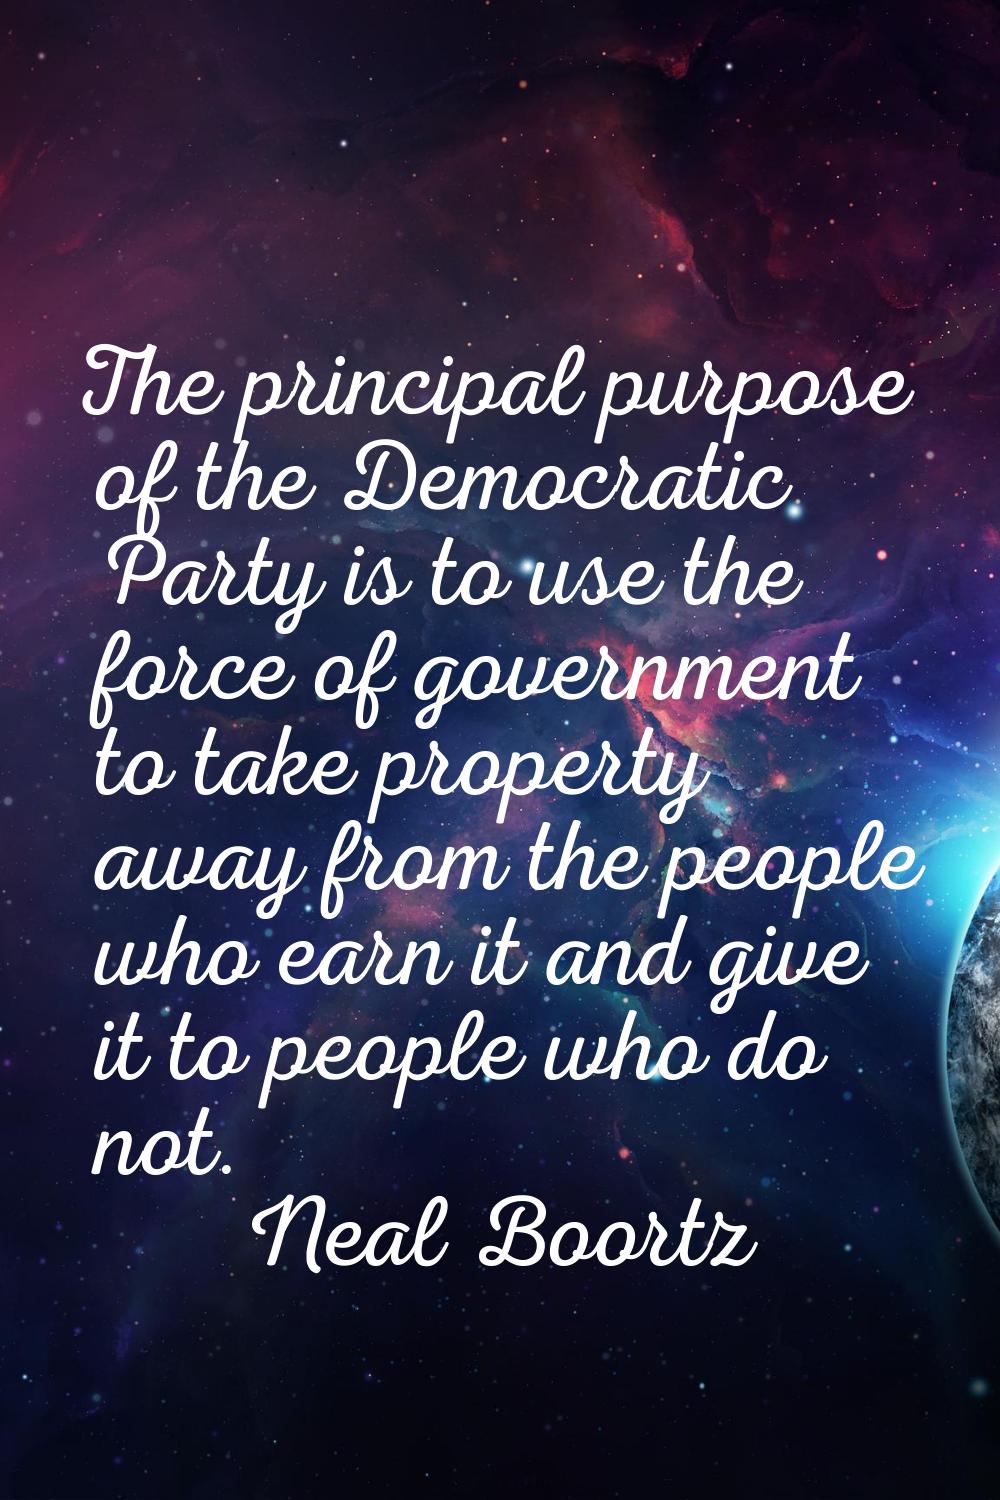 The principal purpose of the Democratic Party is to use the force of government to take property aw